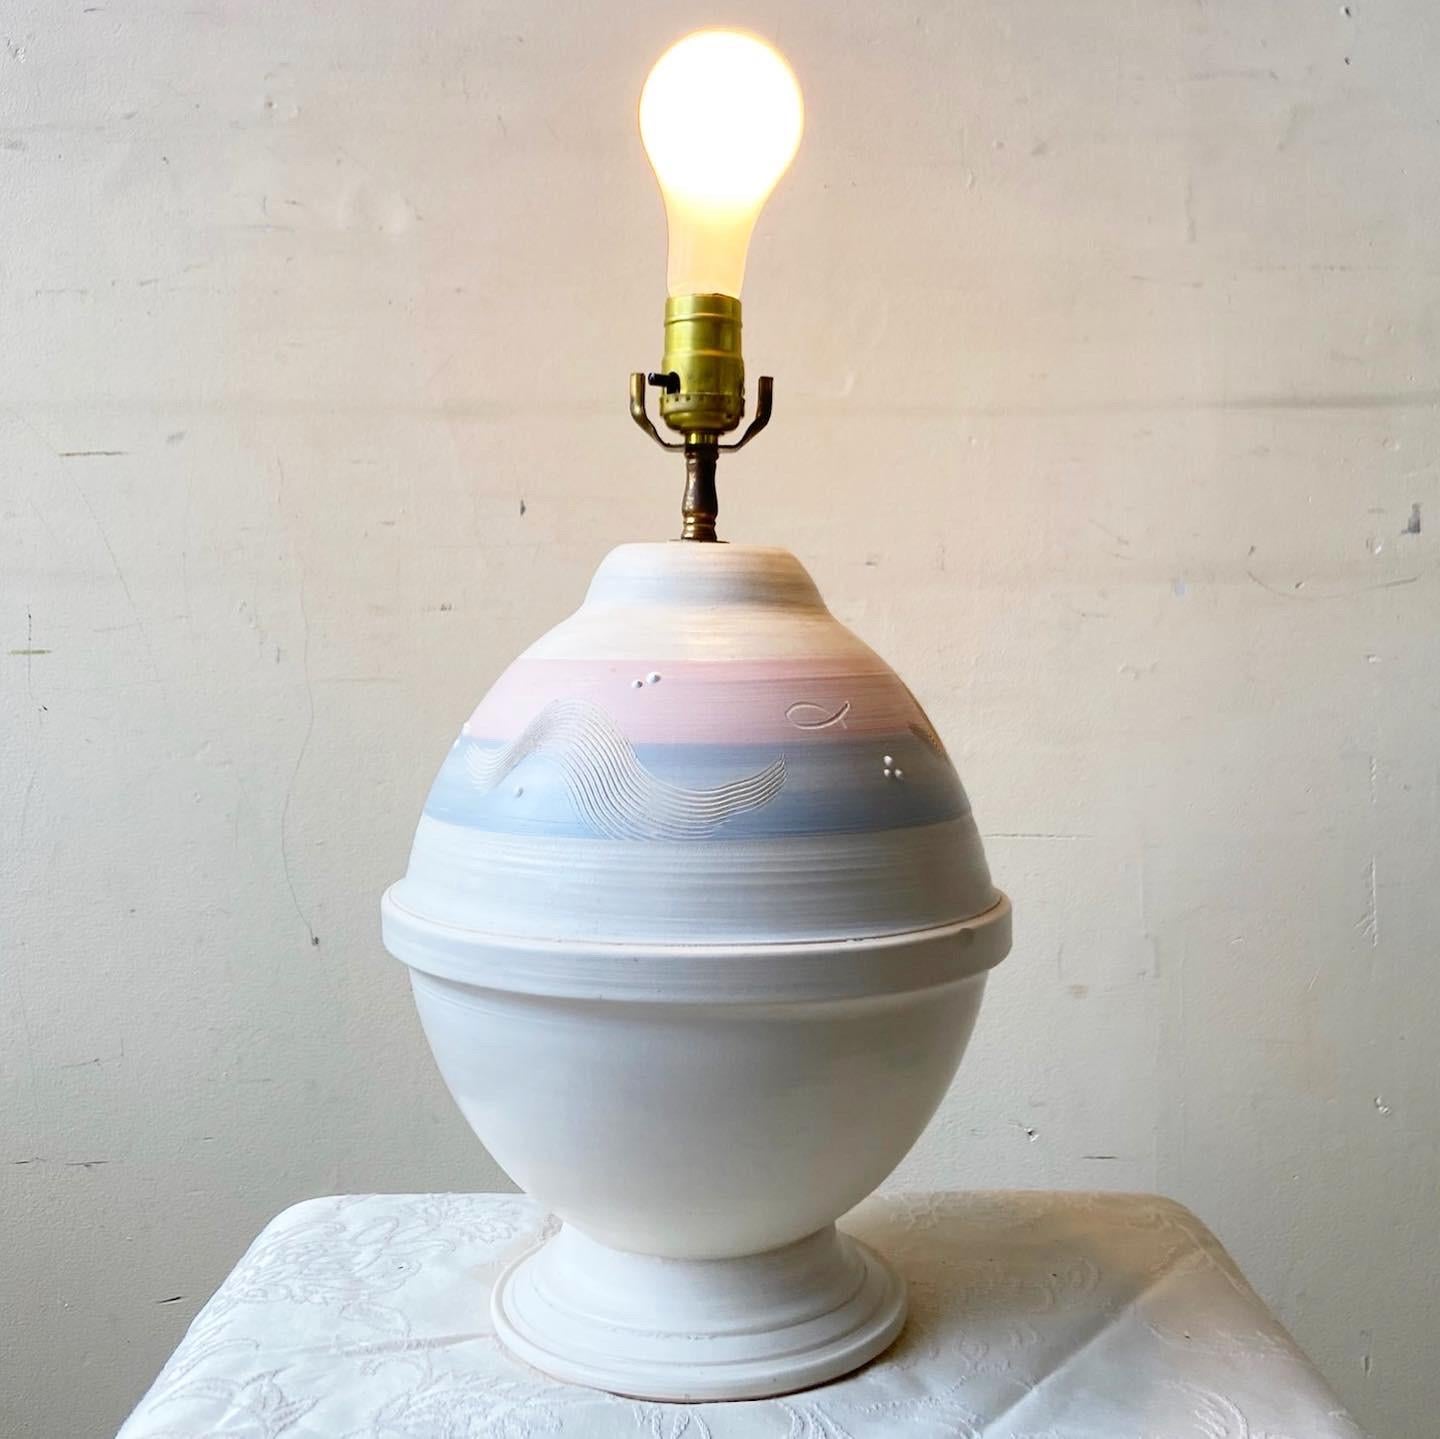 Exceptional postmodern sculpted pottery table lamp. Features an incredible off white, pink and blue finish.

Additional information:
Material: Pottery
Color: Off-White
Style:Postmodern
Time Period: 1980s
Place of origin: USA
Dimension: 10ʺ W × 10ʺ D